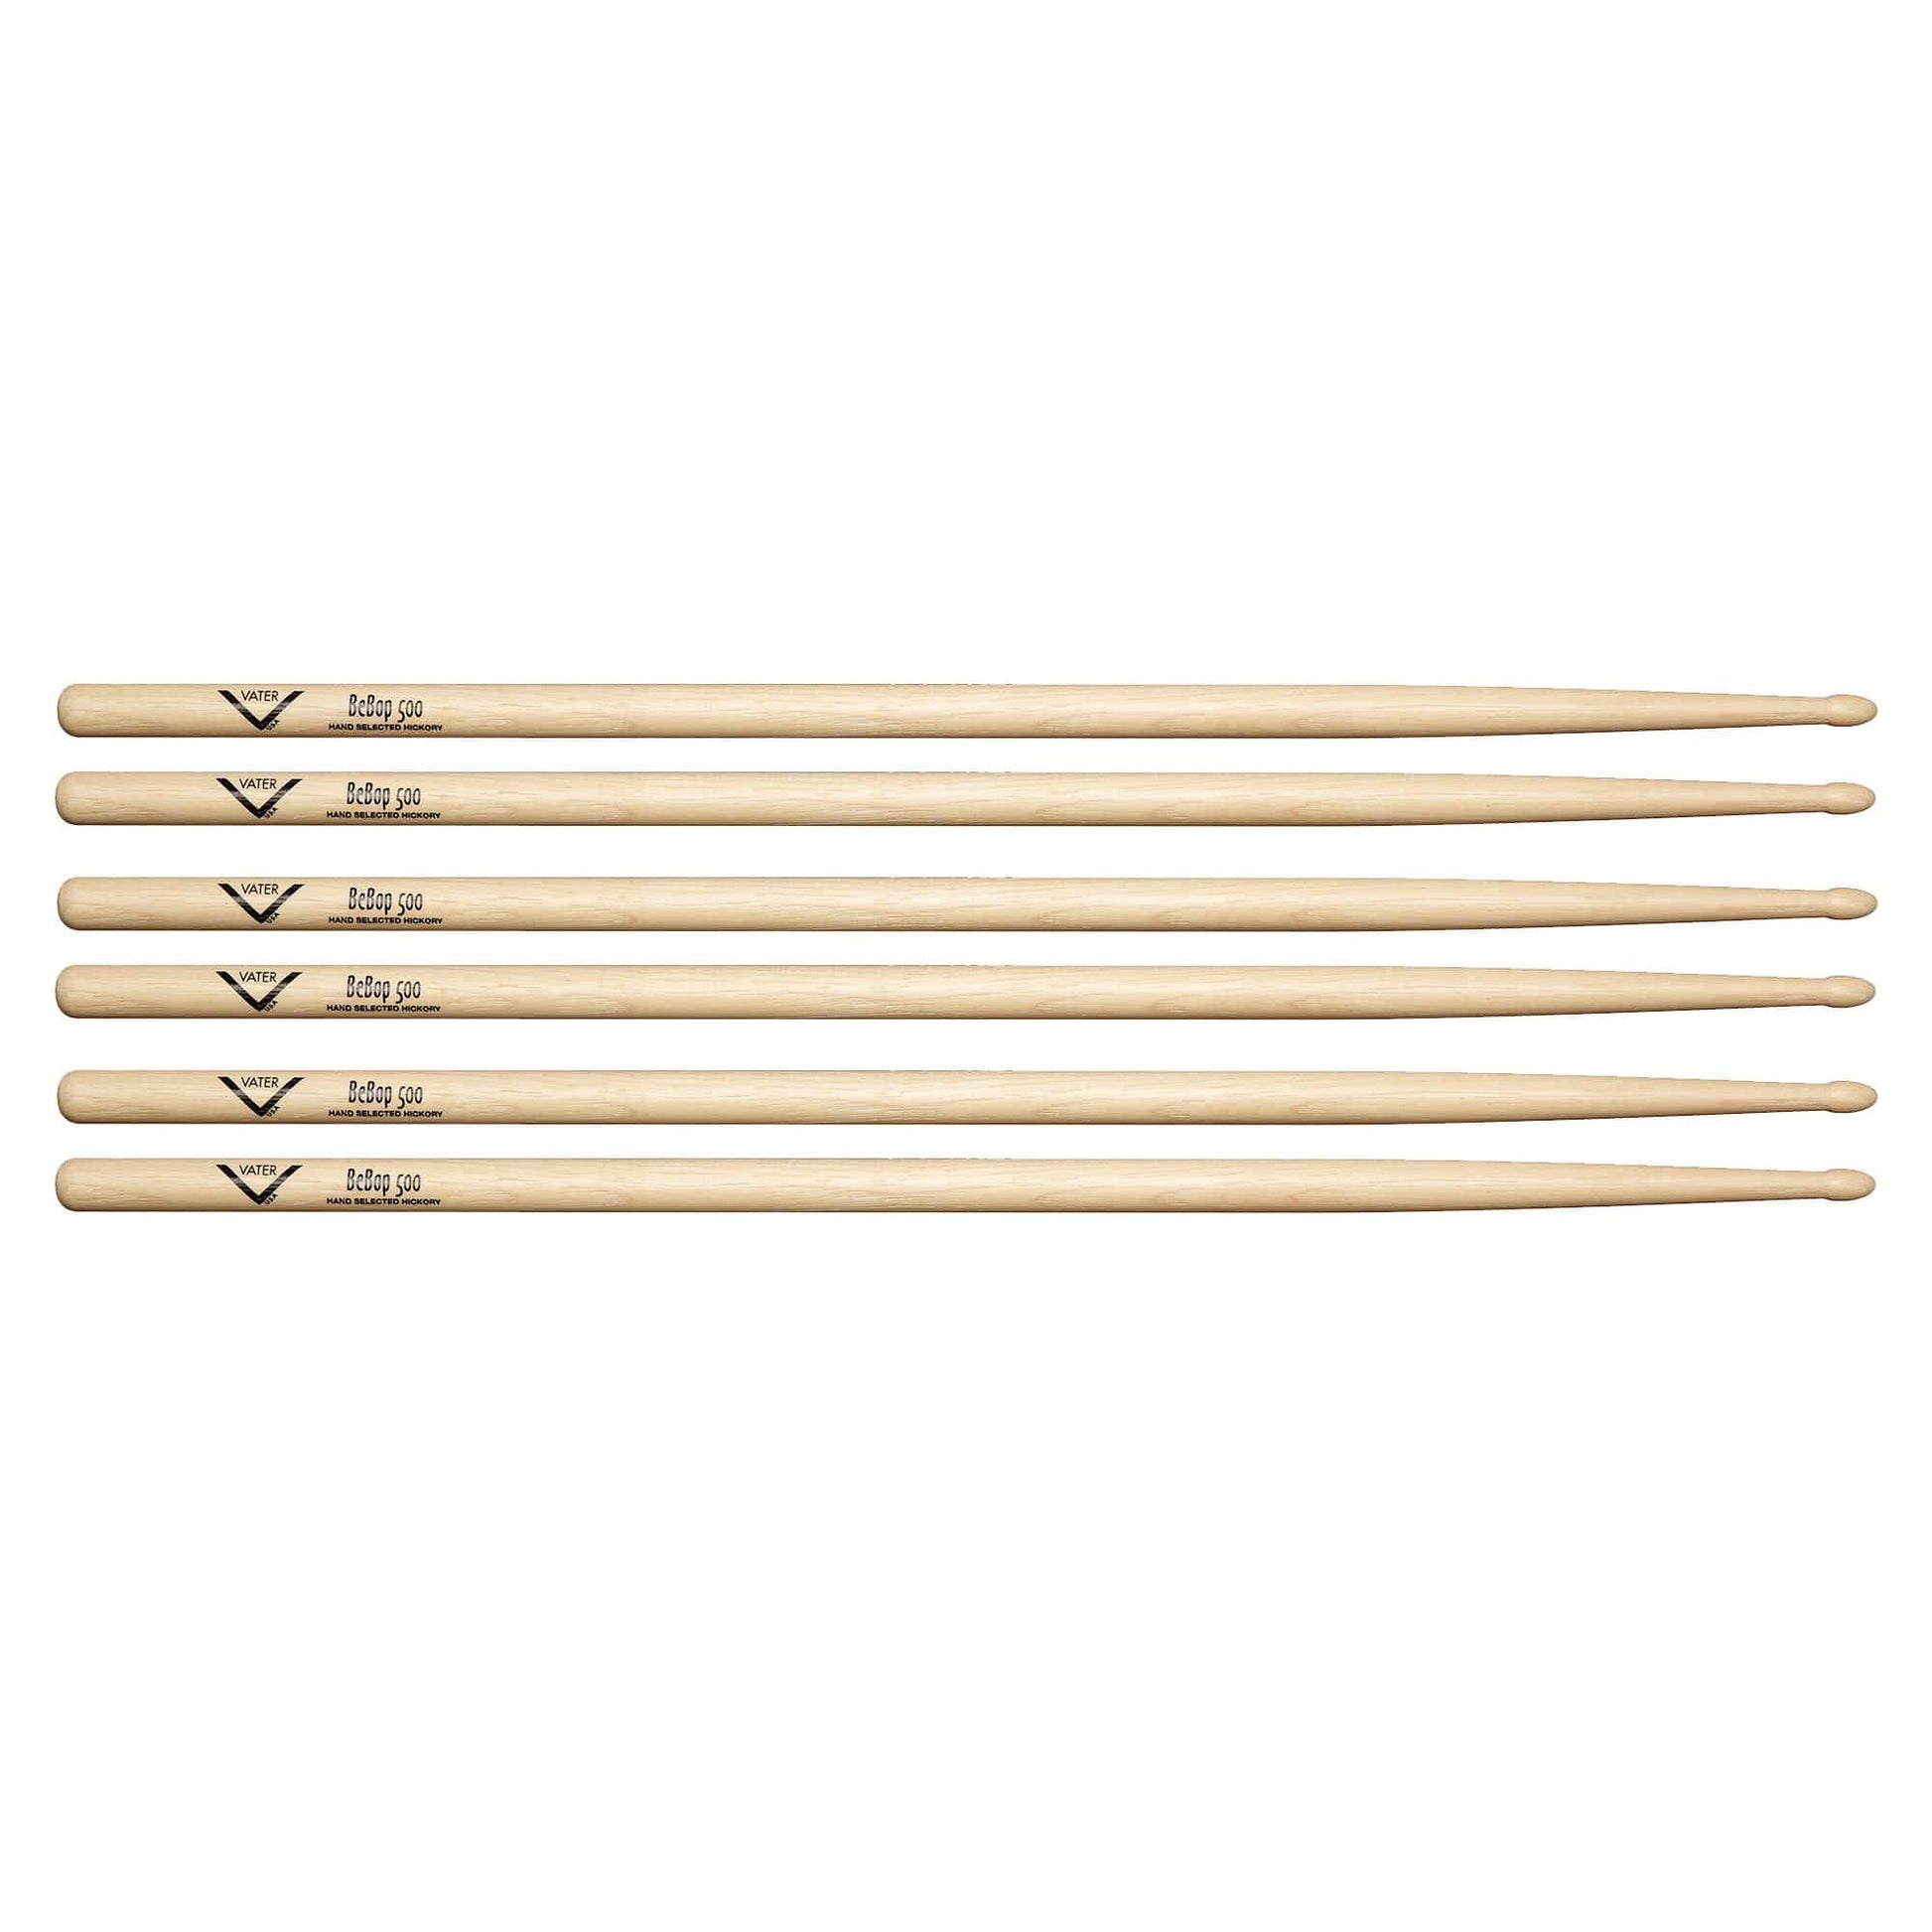 Vater BeBop 500 Drum Sticks (3 Pair Bundle) Drums and Percussion / Parts and Accessories / Drum Sticks and Mallets